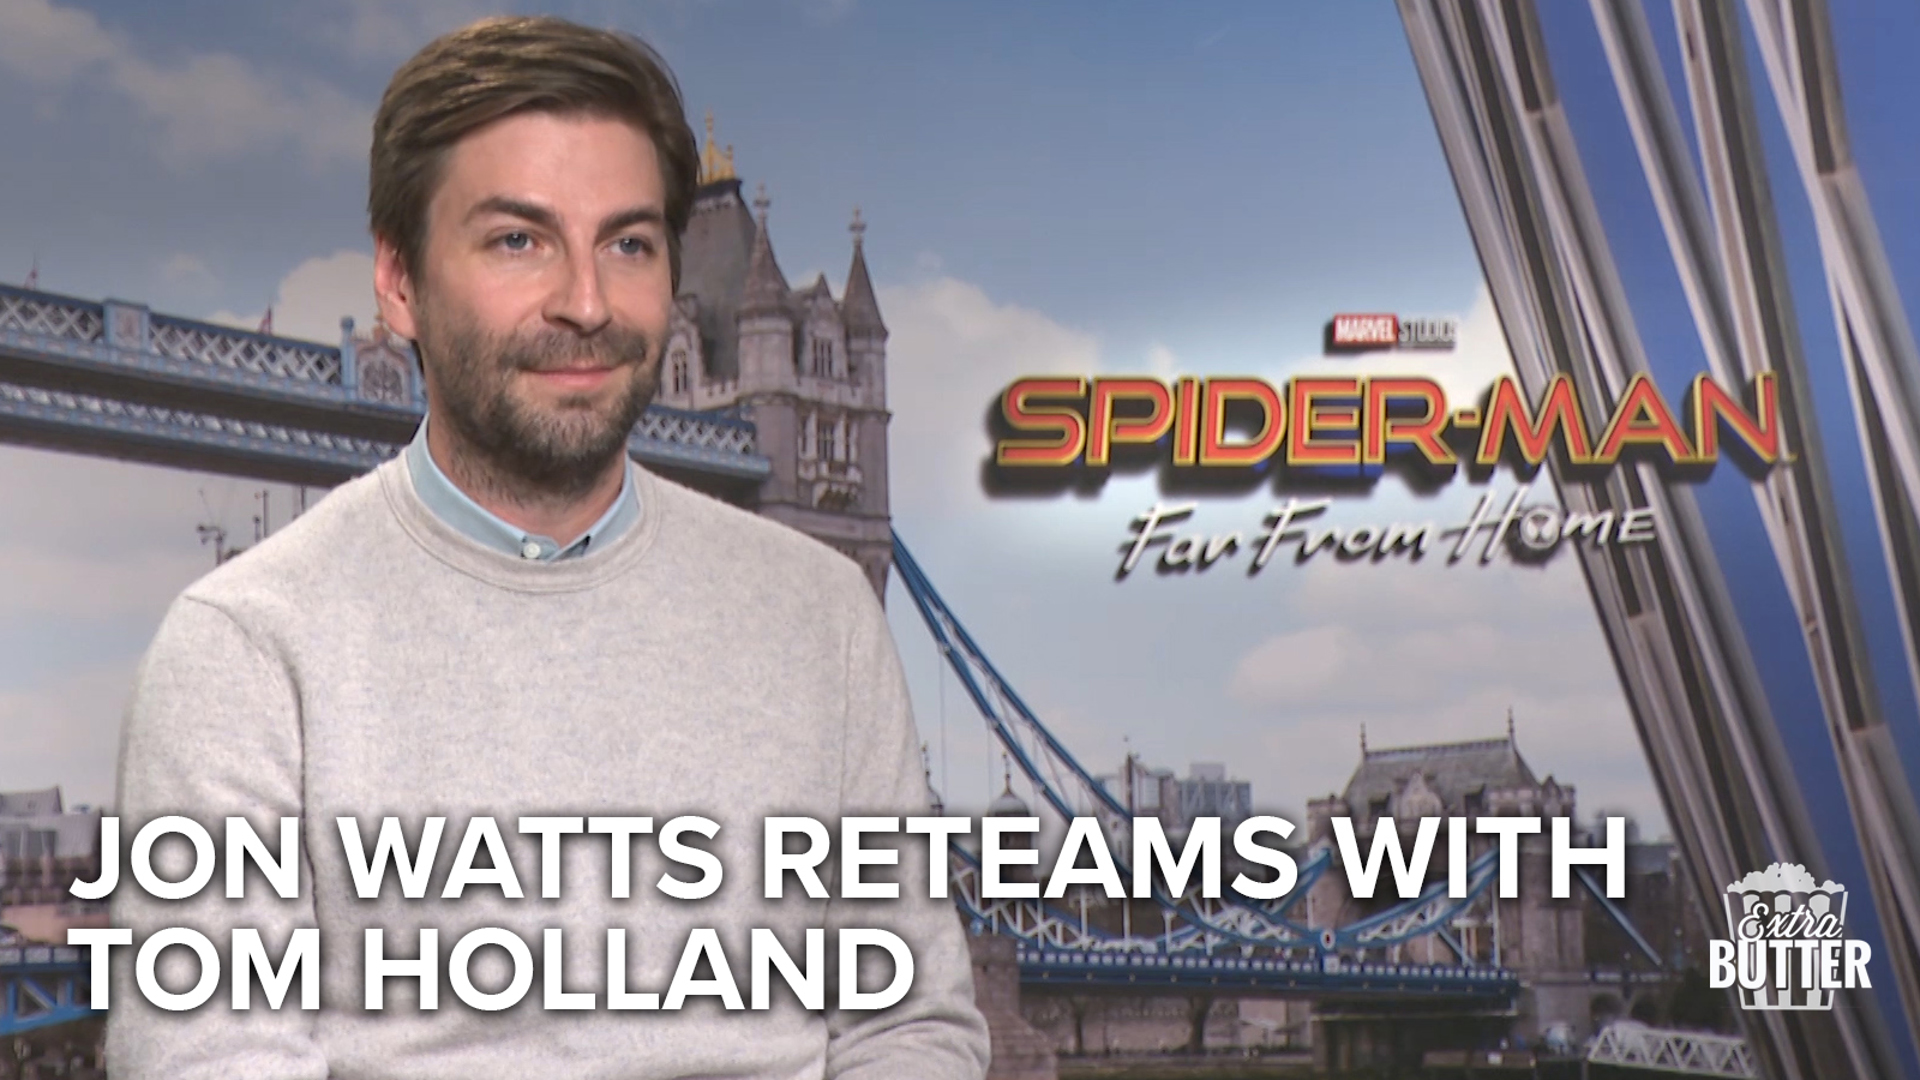 Jon Watts talks about directing Tom Holland (again) in 'Spider-Man: Far Form Home.' Jon also talks about some of his favorite moments (without plot spoiling).